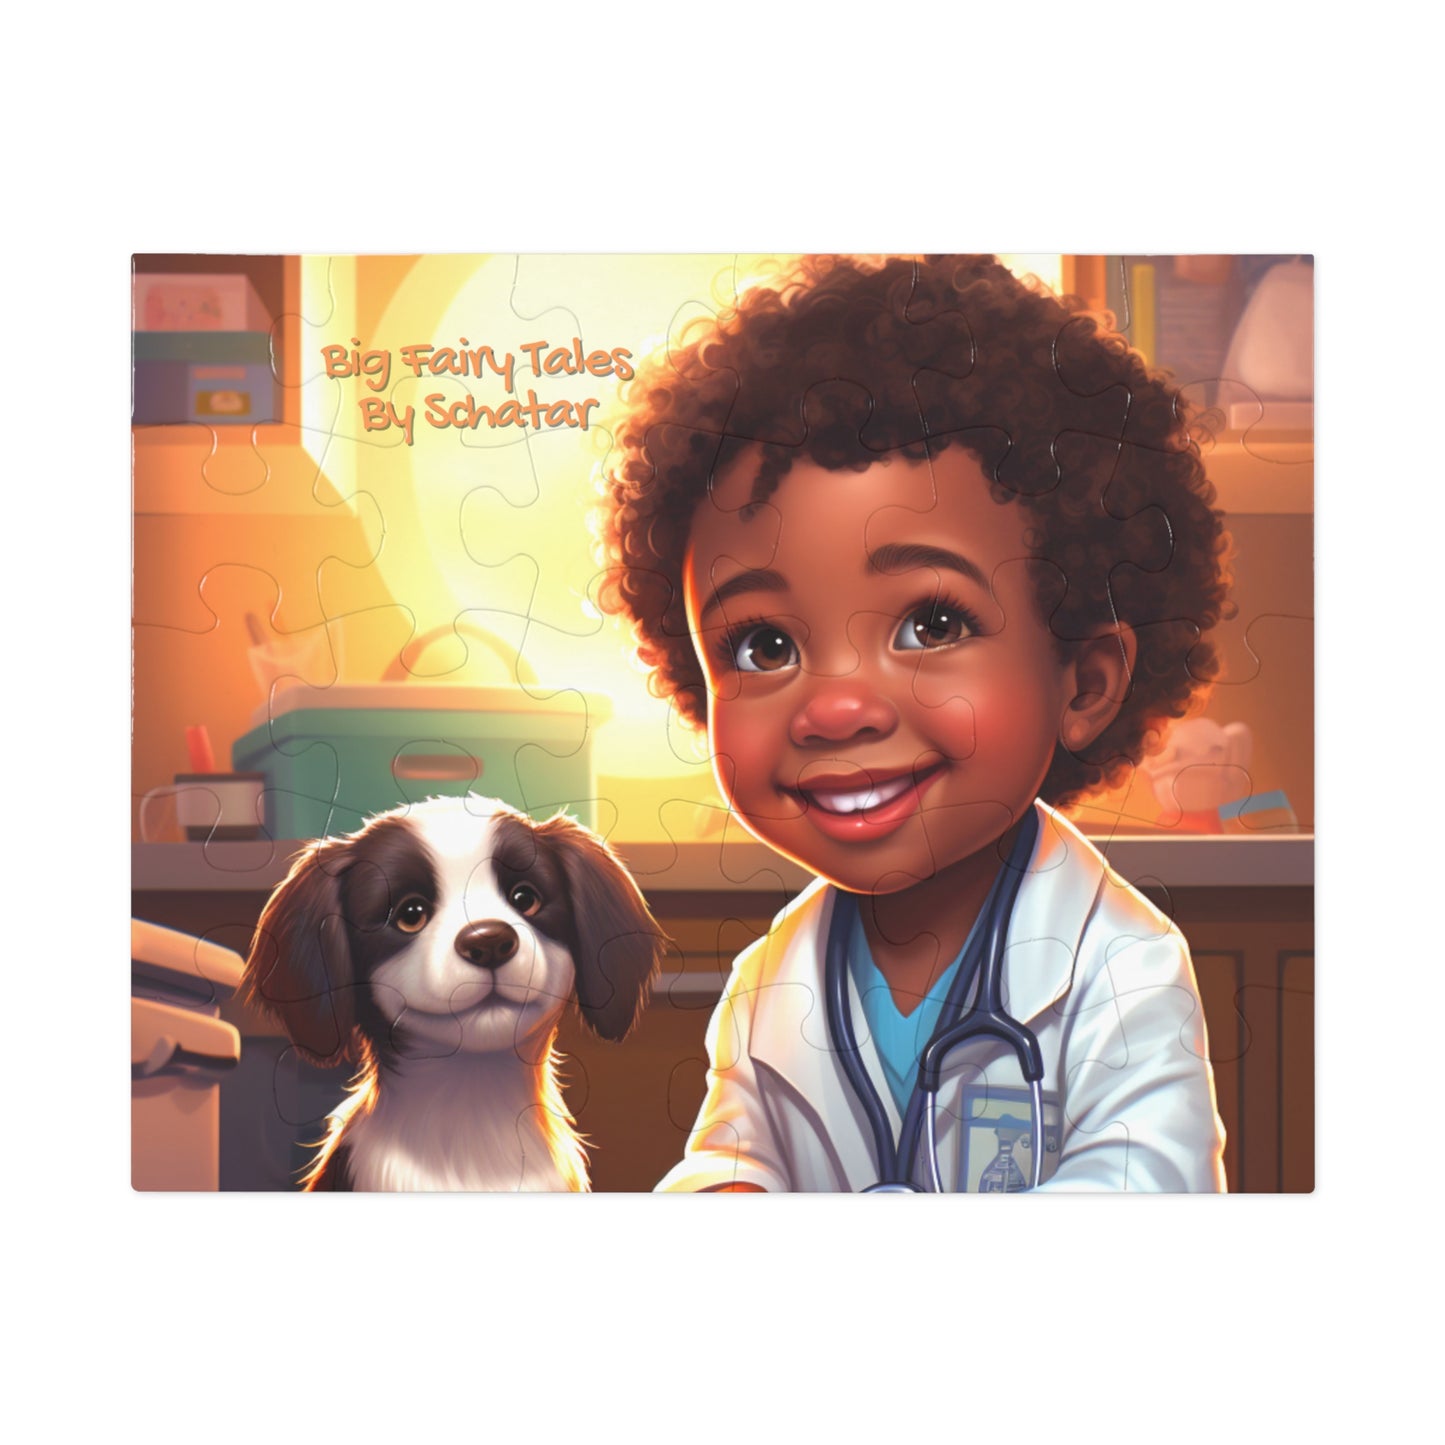 Veterinarian - Big Little Professionals Puzzle 6 From Big Fairy Tales By Schatar